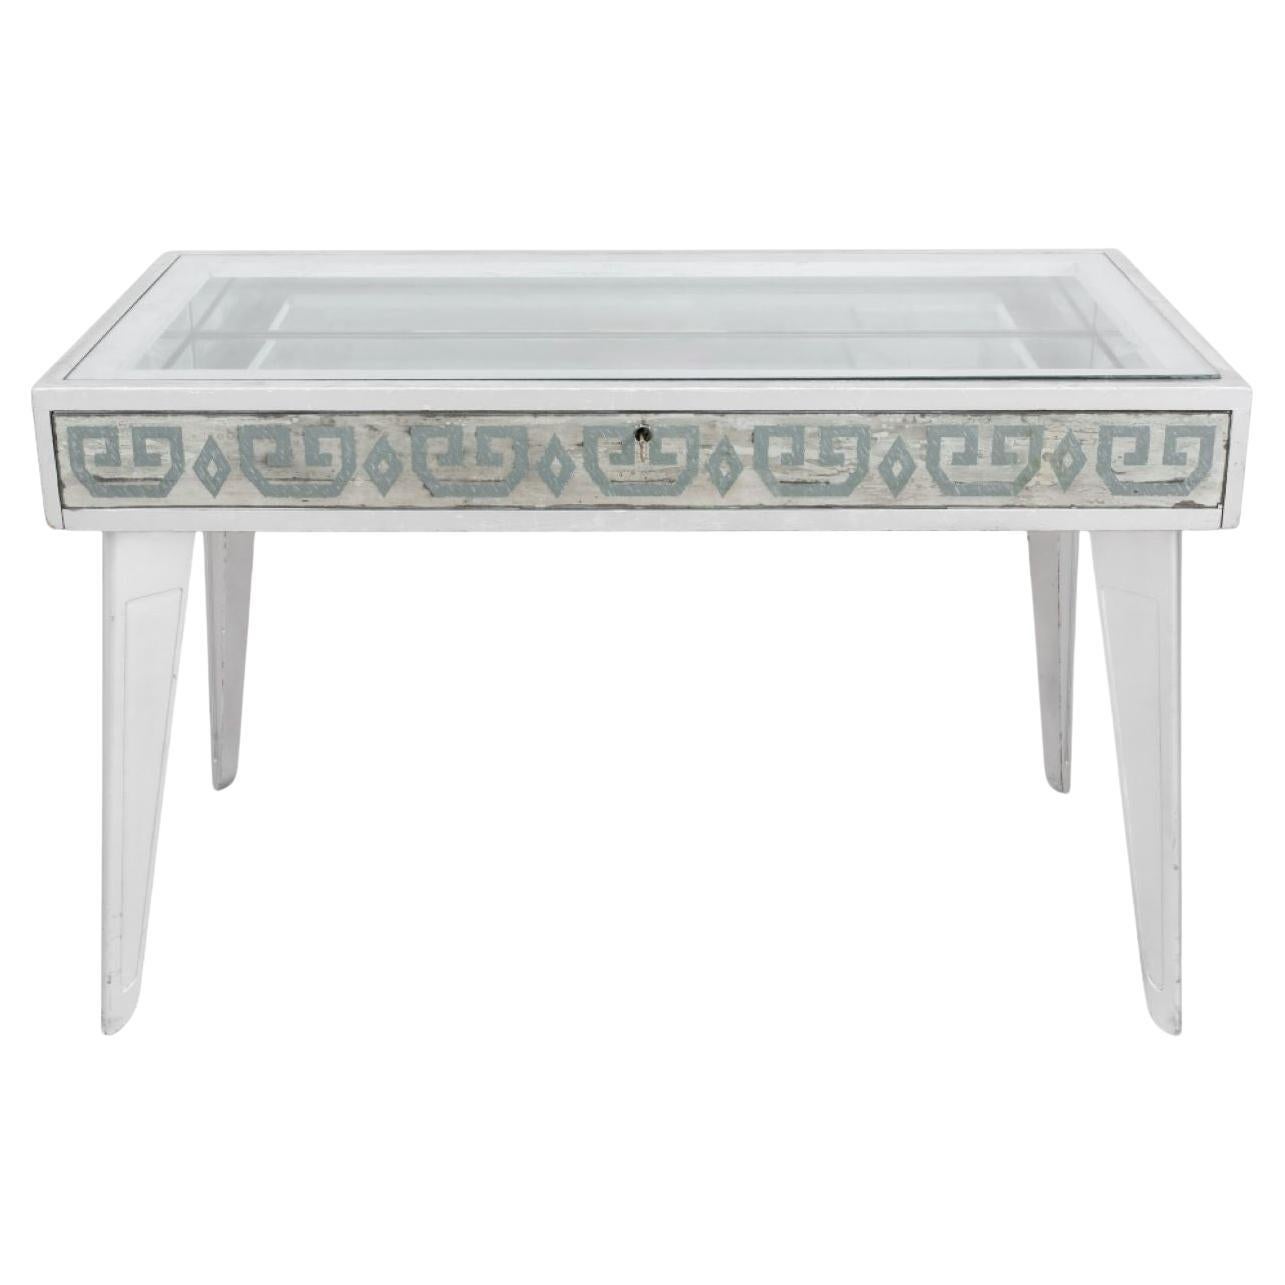 Silvered Art Deco or Moderne Vitrine Table, 1940s For Sale